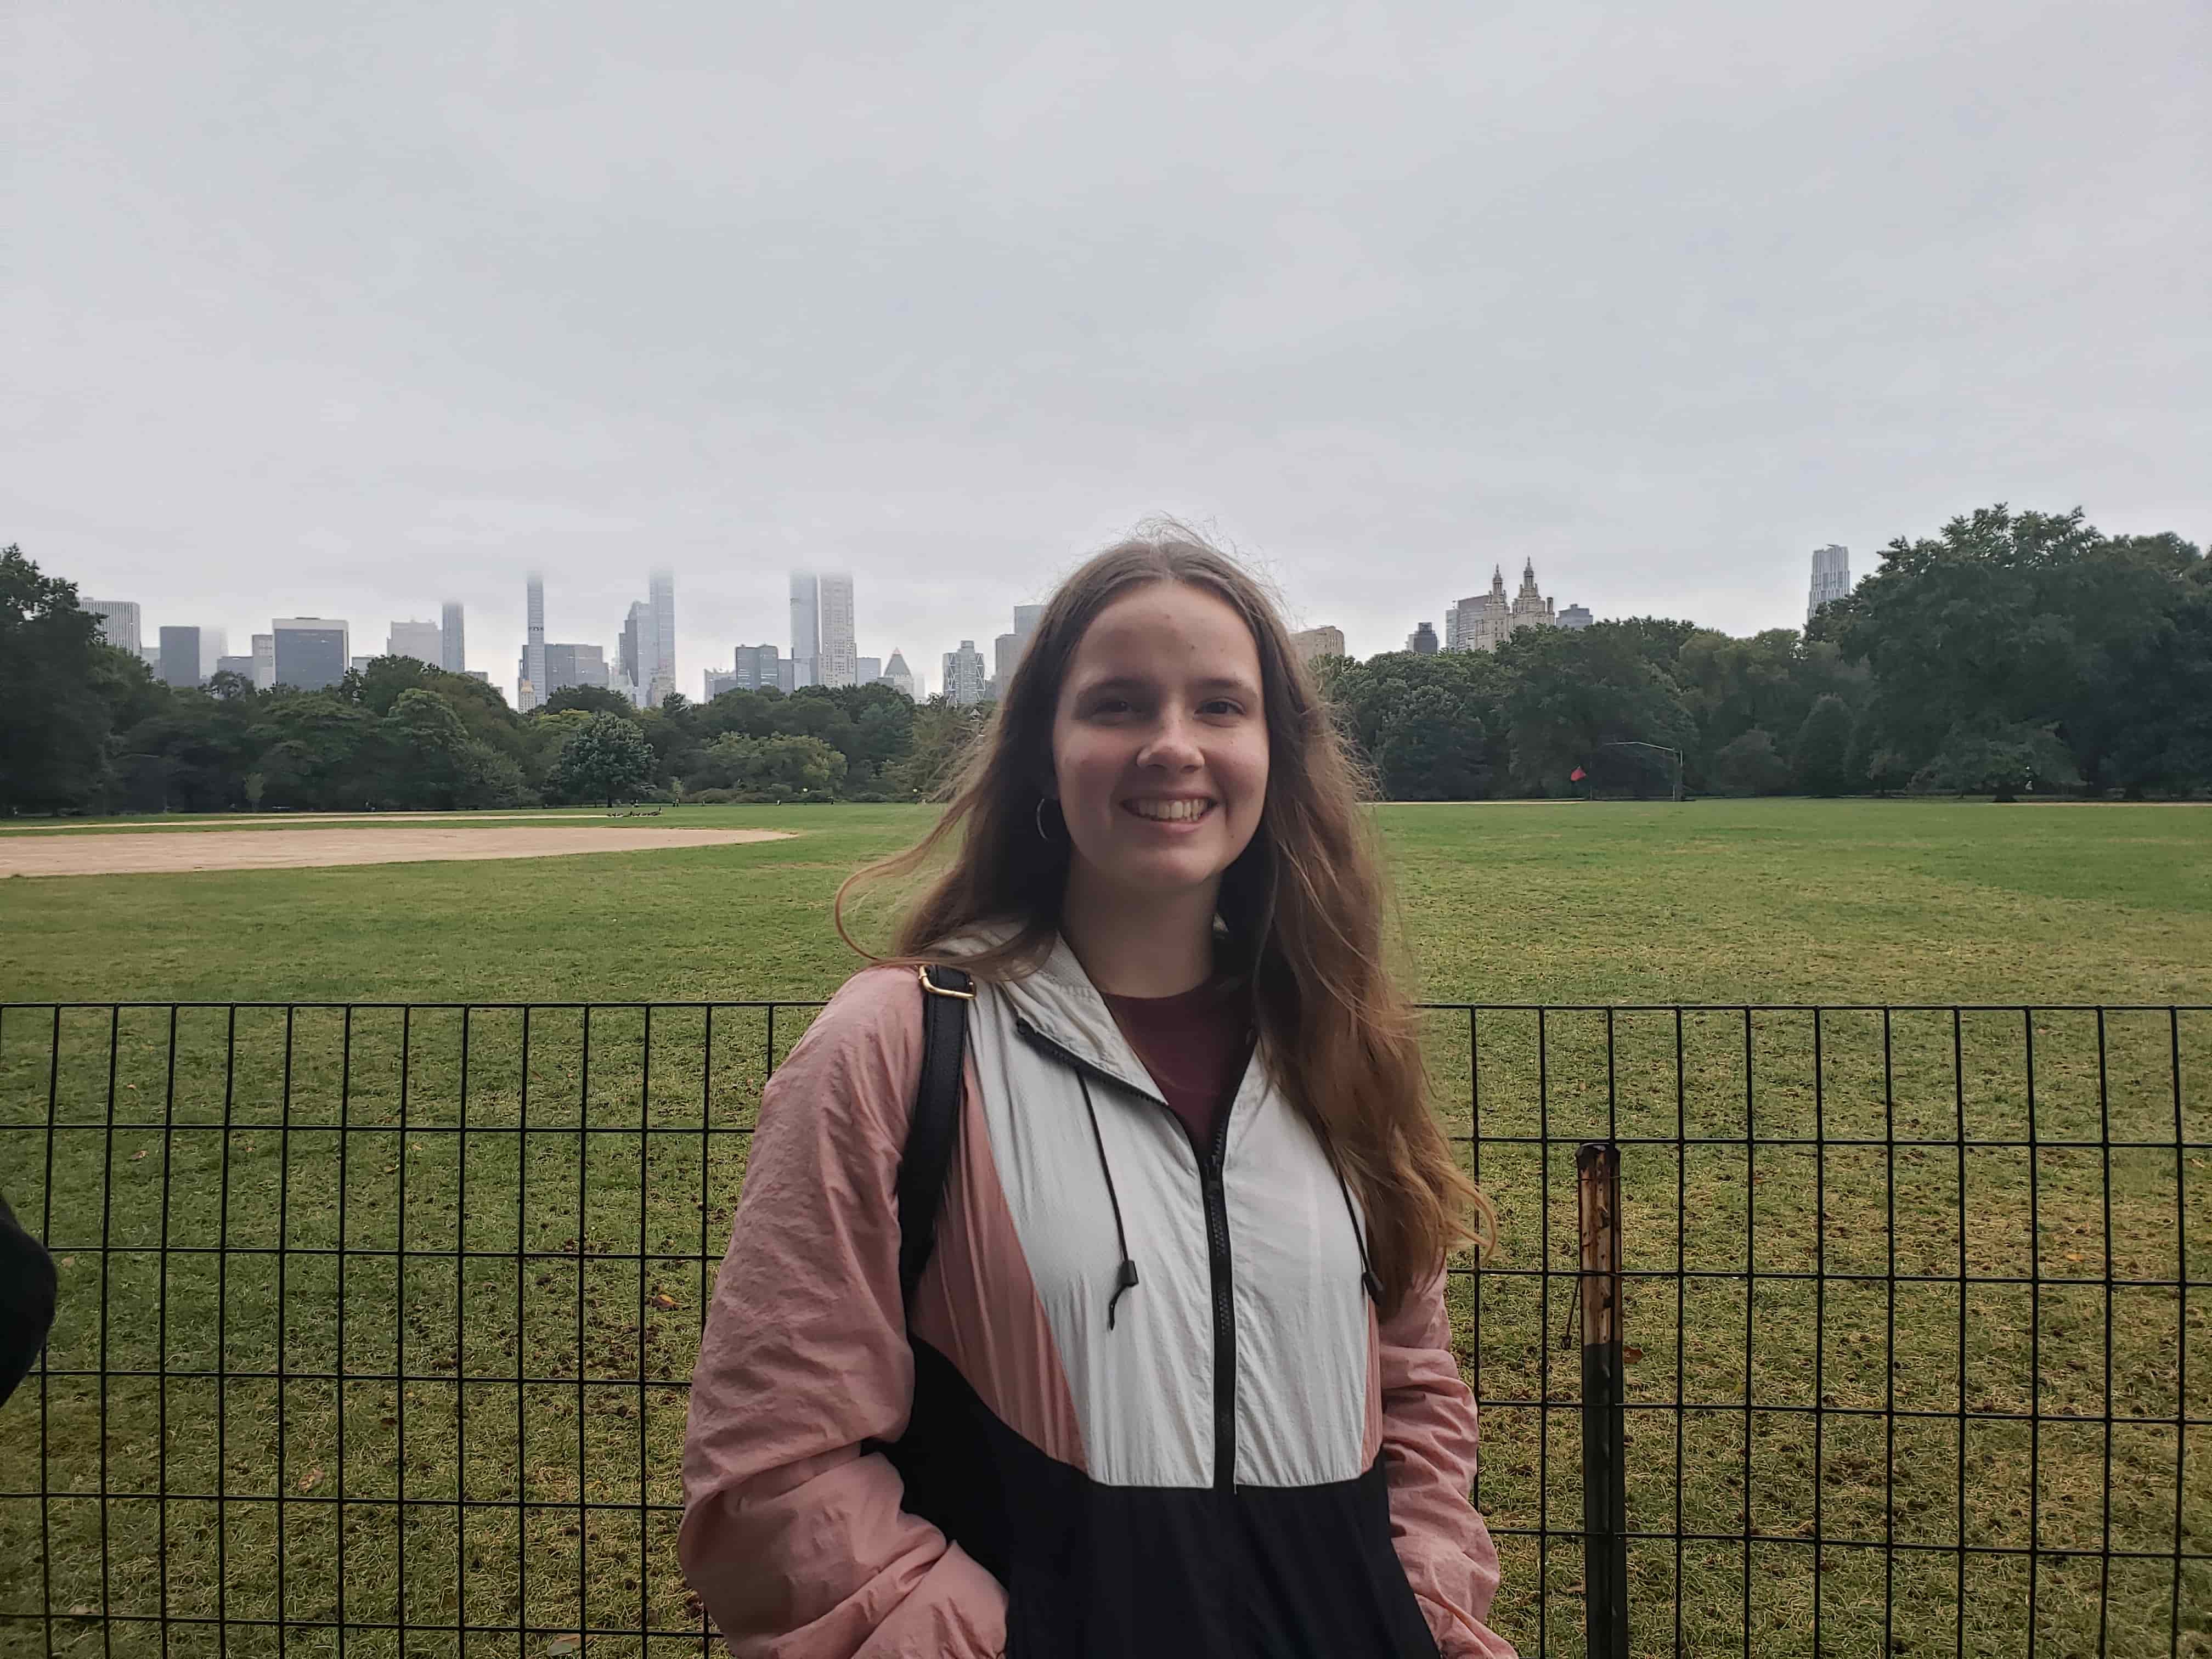 Photo of Melia standing in front of Central Park NYC wearing a pink and white windbreaker. She has long dirty-blonde hair and is smiling at the camera.